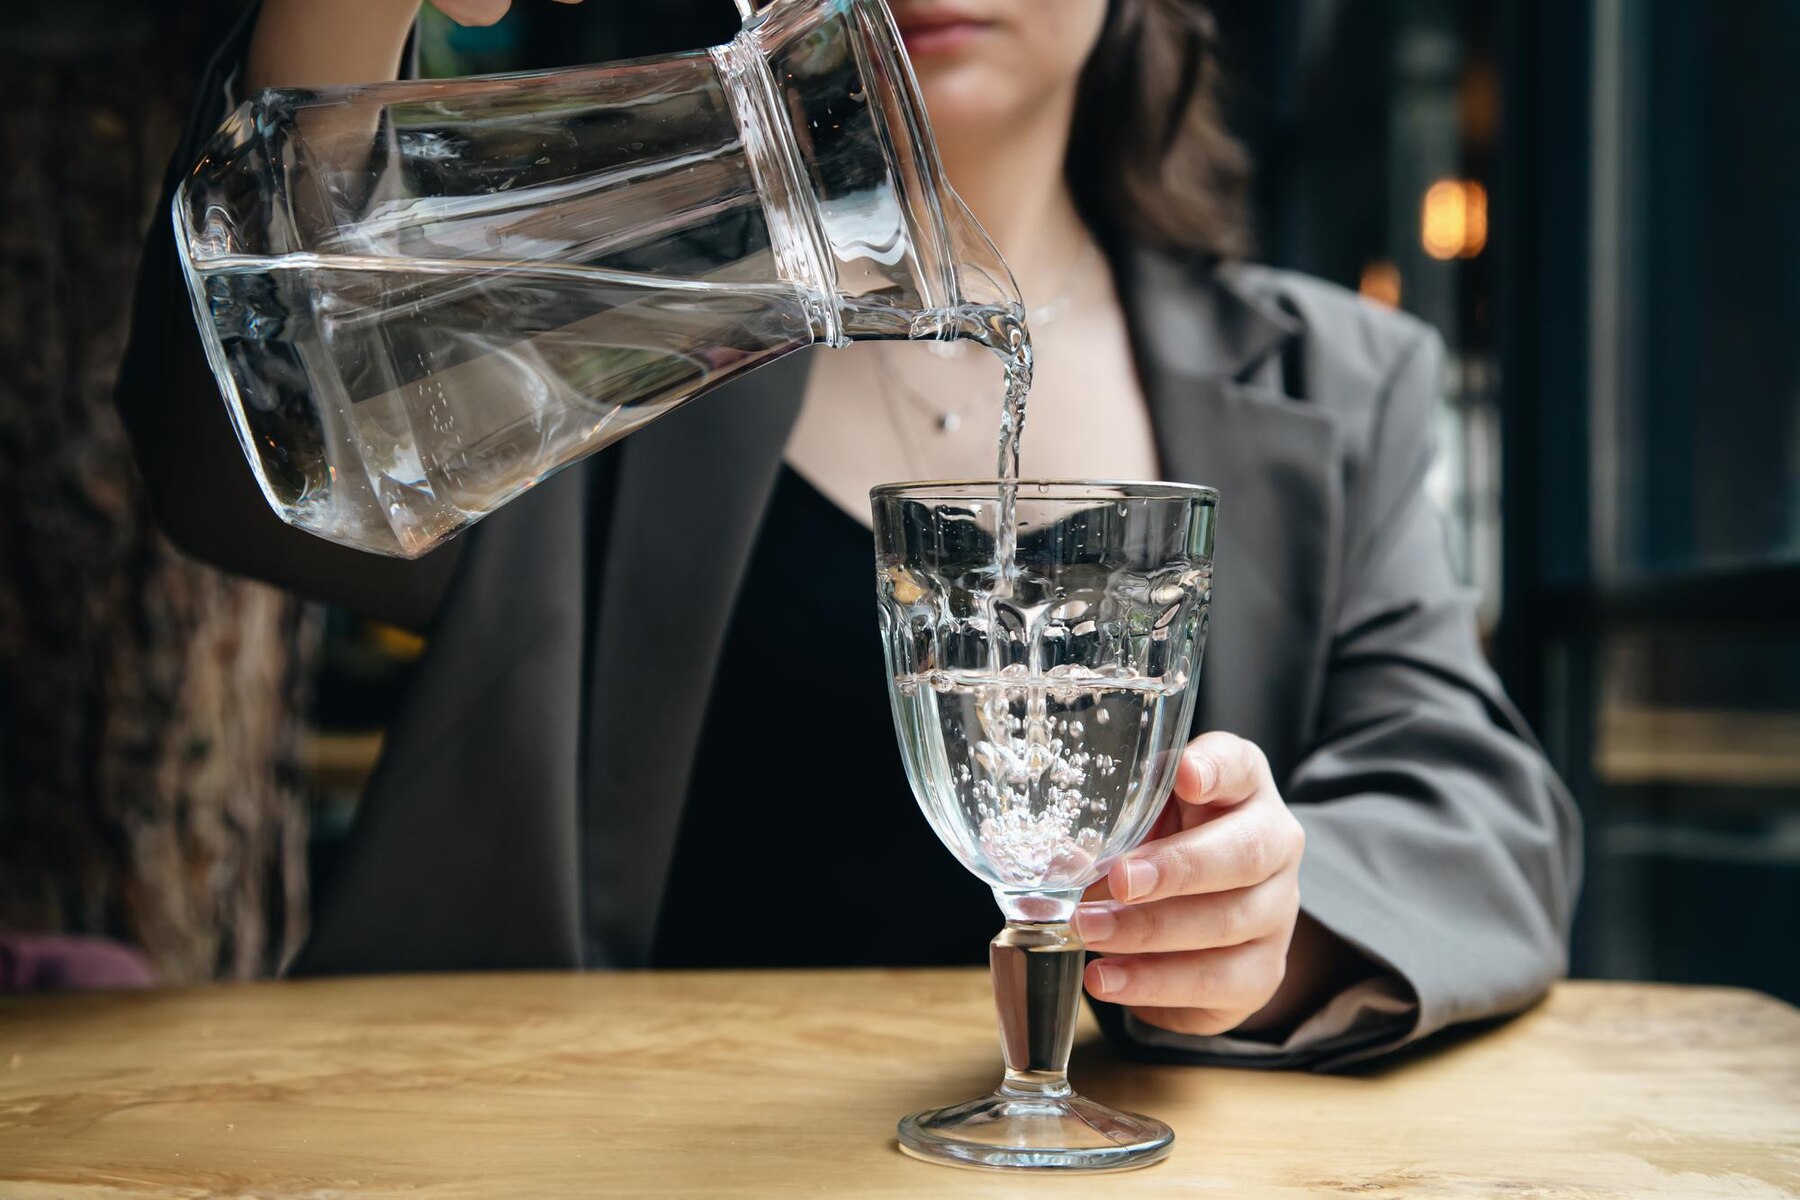 closeup-a-woman-pours-water-into-a-glass-in-a-cafe_169016-21808 (1).jpg